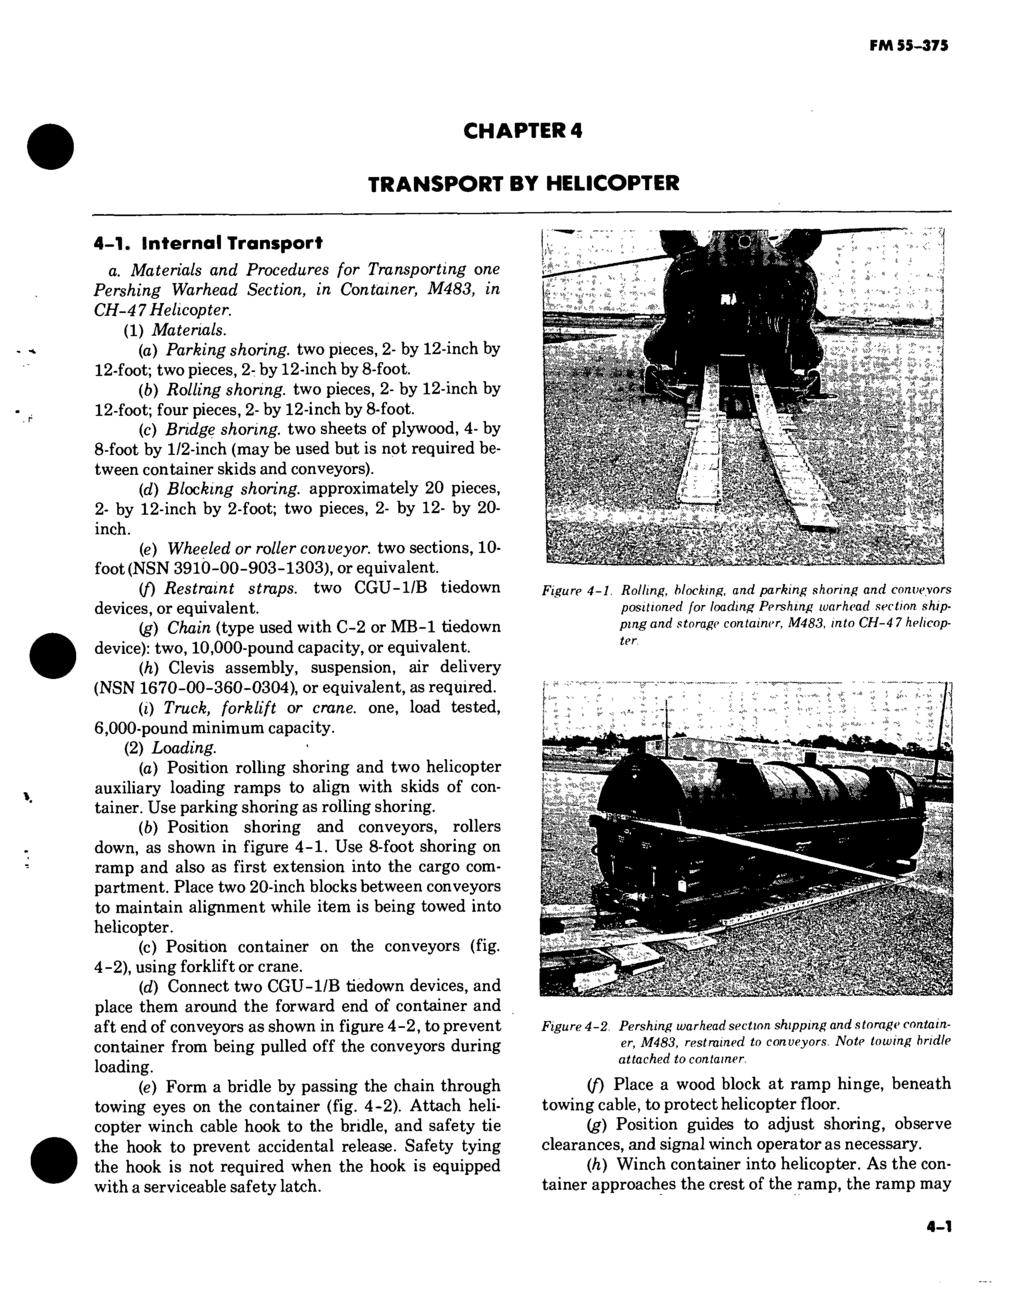 FM 55-375 CHAPTER 4 TRANSPORT BY HELICOPTER 4-1. Internal Transport a. Materials and Procedures for Transporting one Pershing Warhead Section, in Container, M483, in CH-4 7 Helicopter. (1) Materials.